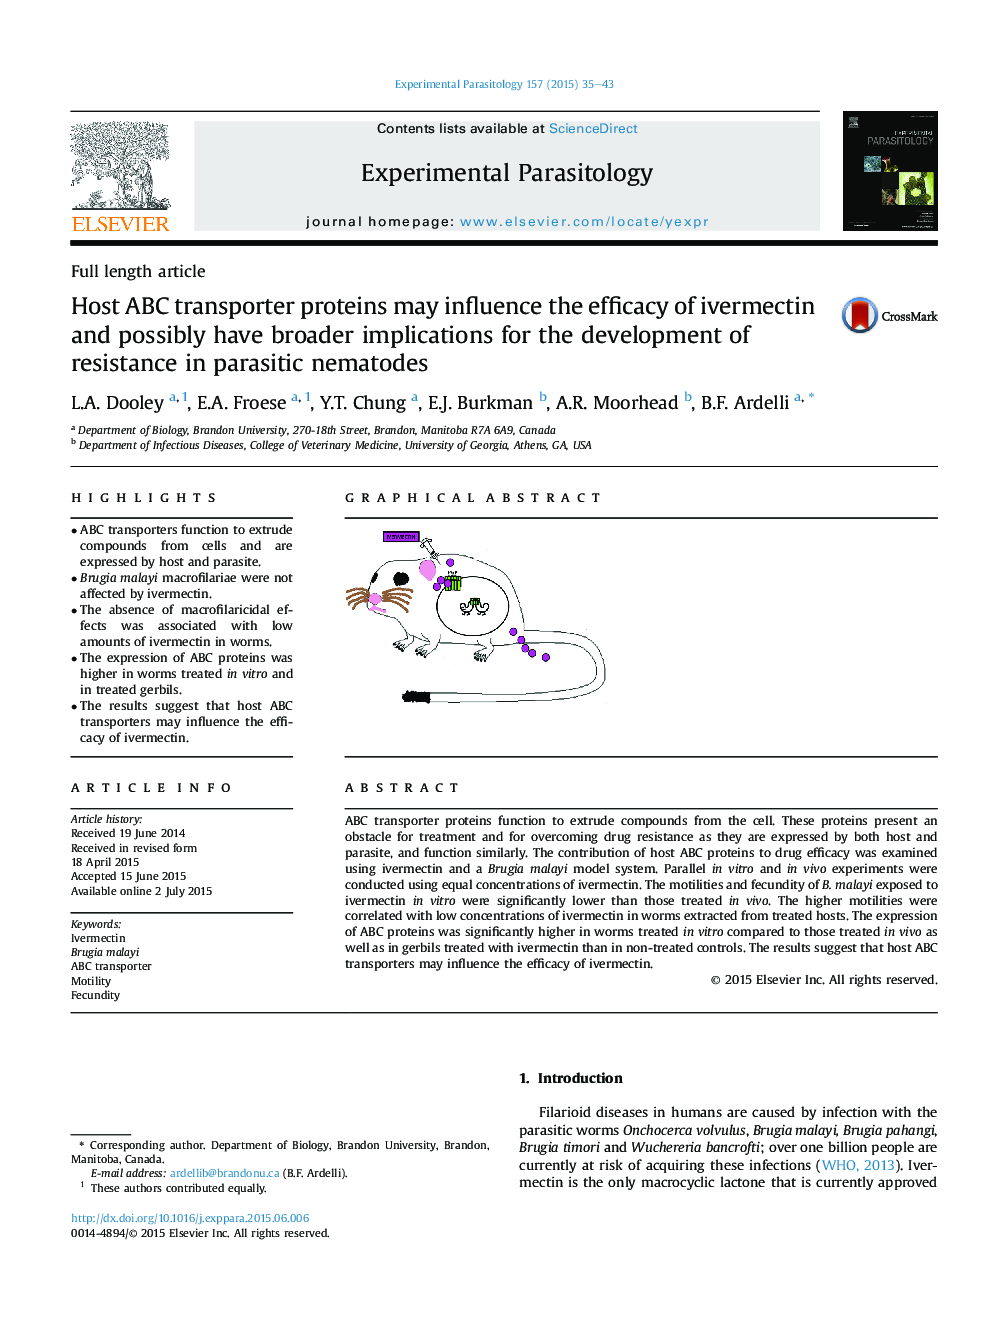 Full length articleHost ABC transporter proteins may influence the efficacy of ivermectin and possibly have broader implications for the development of resistance in parasitic nematodes